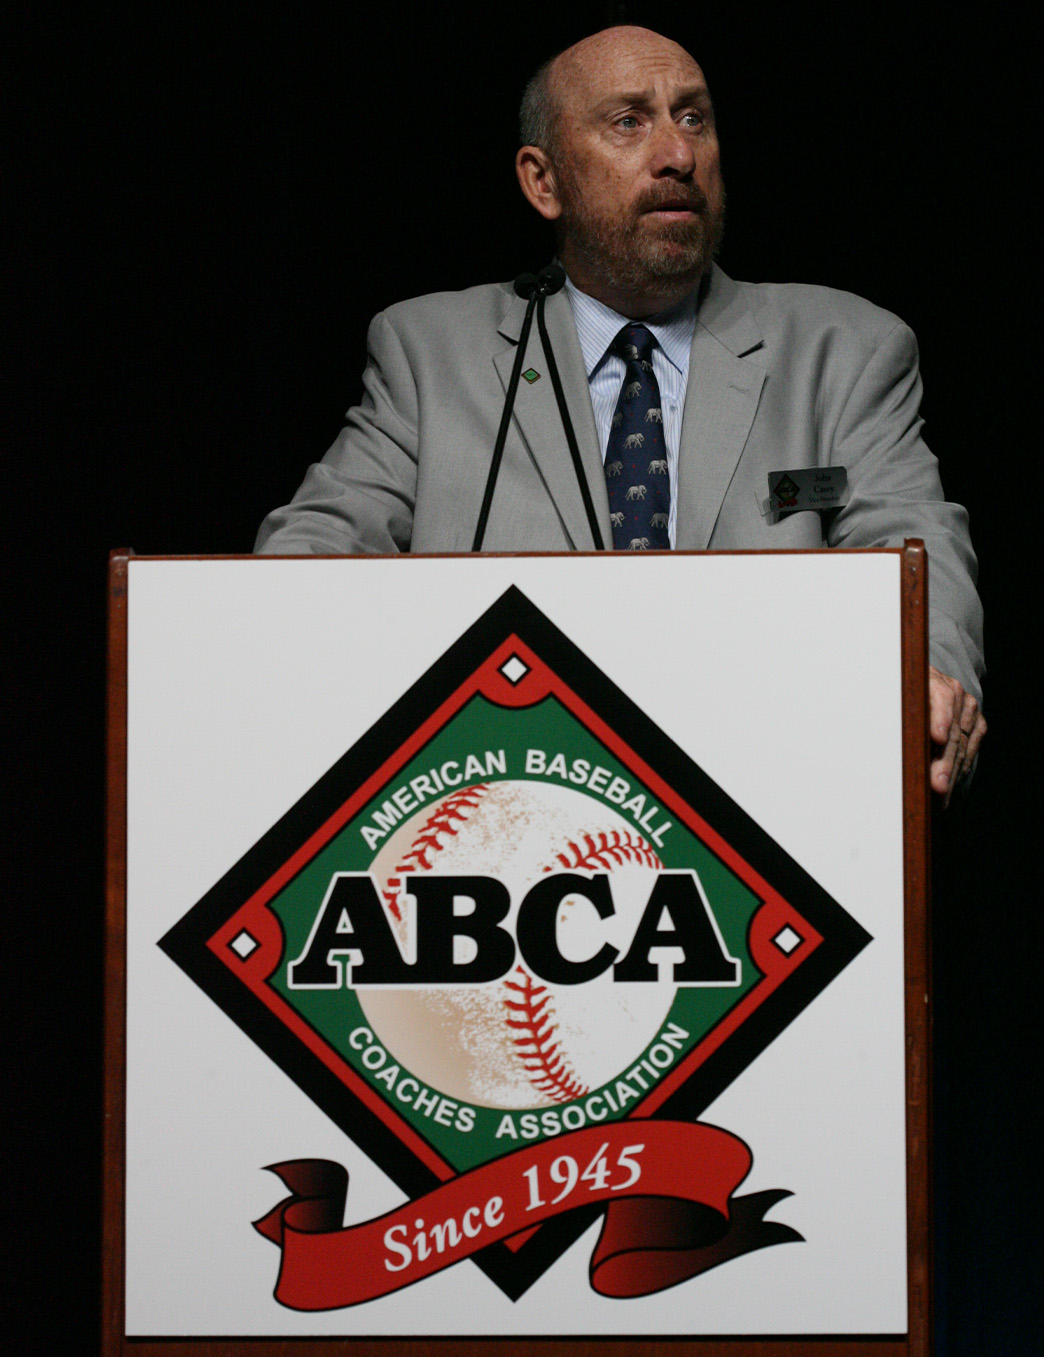 John Casey in a grey suit speaking at a wooden podium with ABCA logo on it at the 2015 ABCA Convention